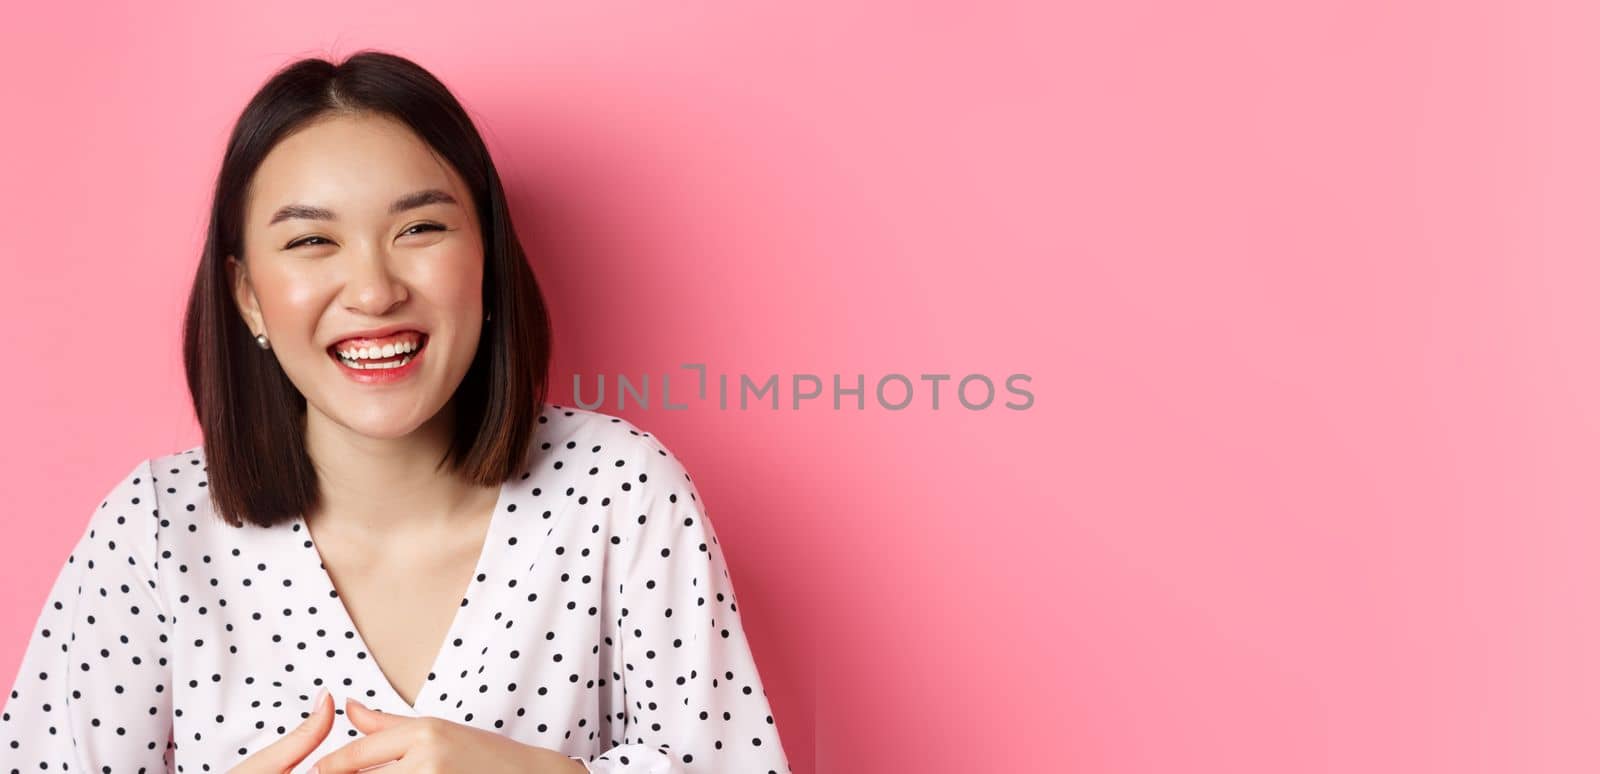 Beauty and lifestyle concept. Close-up of happy asian woman laughing and having fun, standing over pink background. Copy space